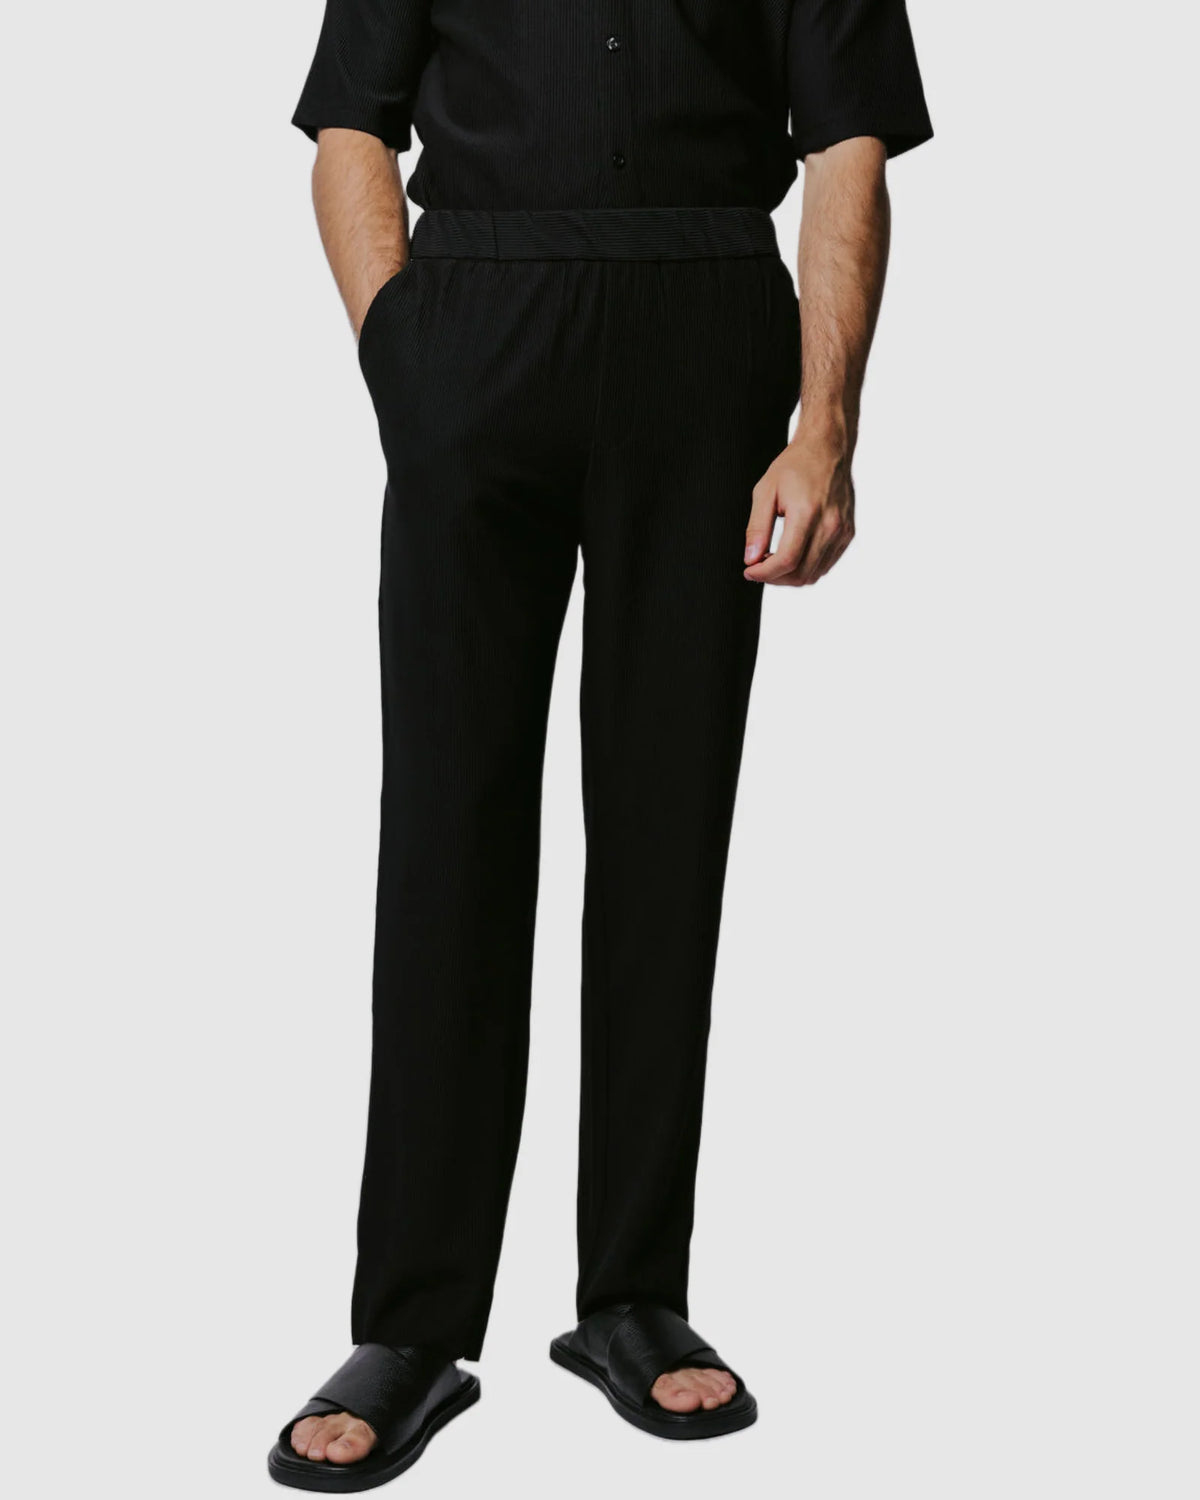 Justin Cassin Abade Pleated Pants in Black Color